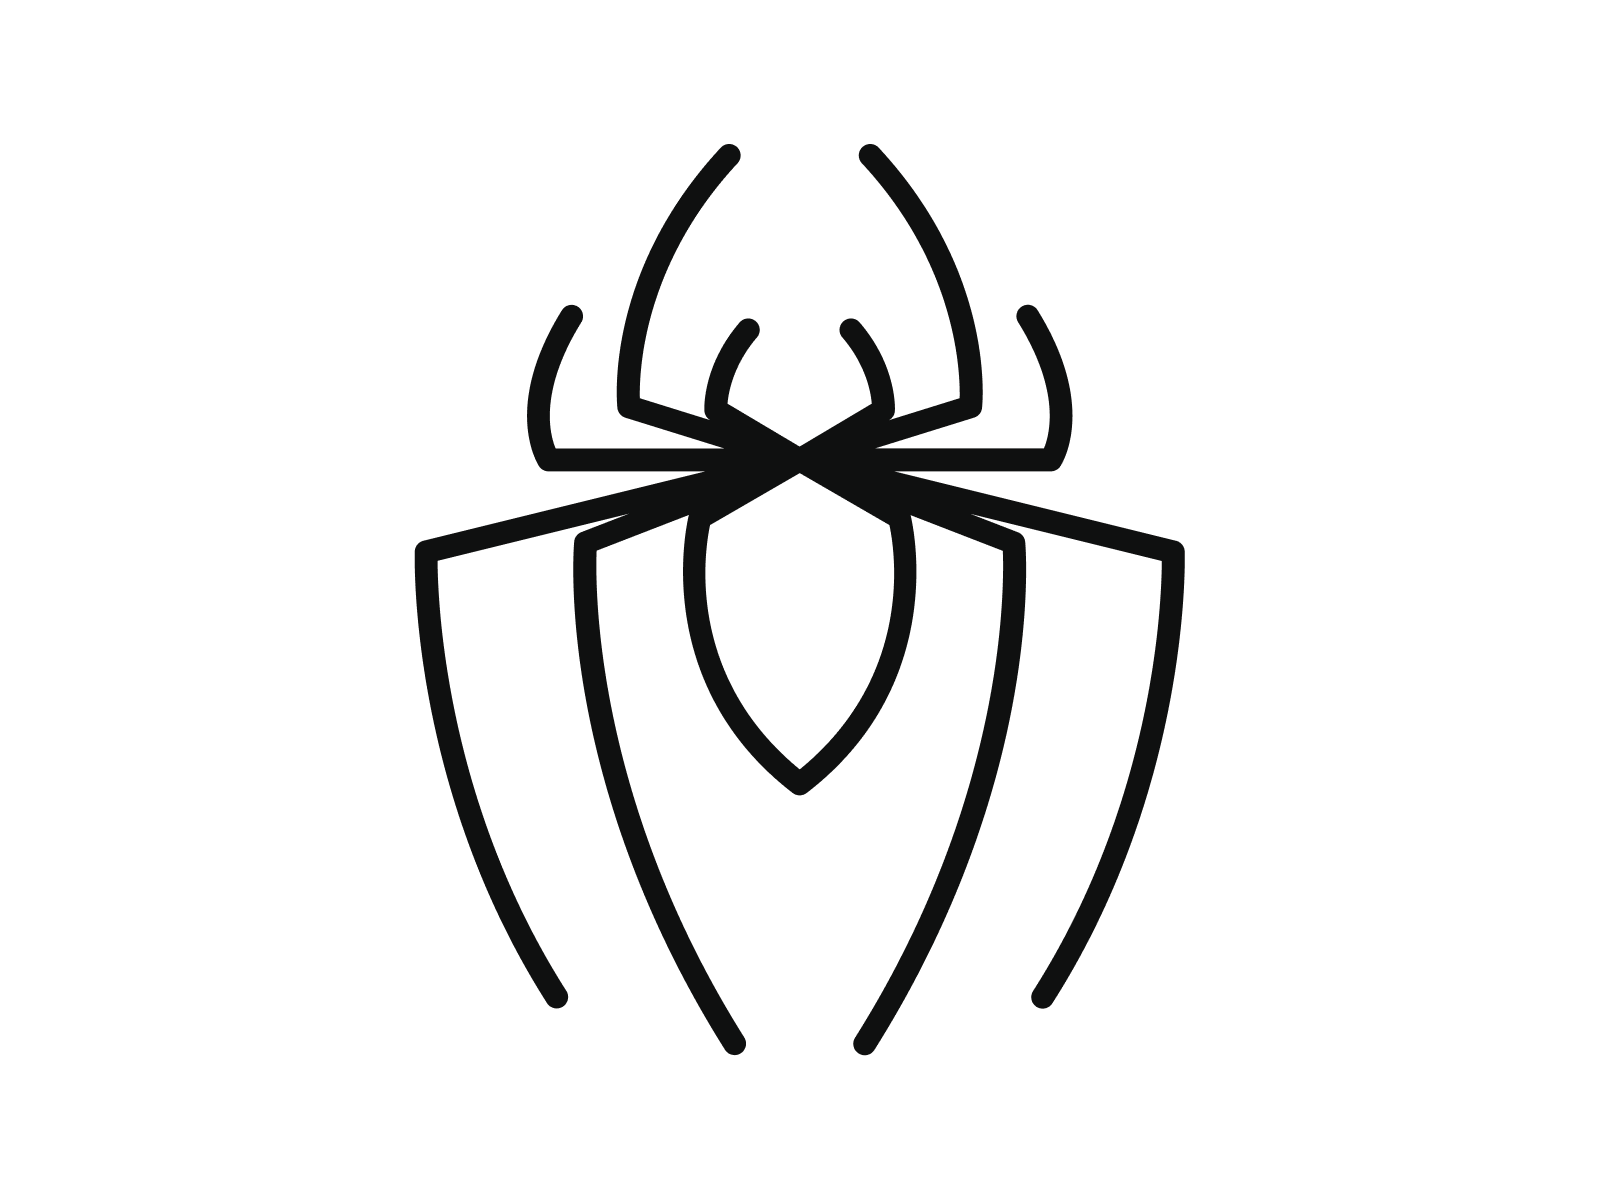 Spider-Man Logo #2 by Nour on Dribbble